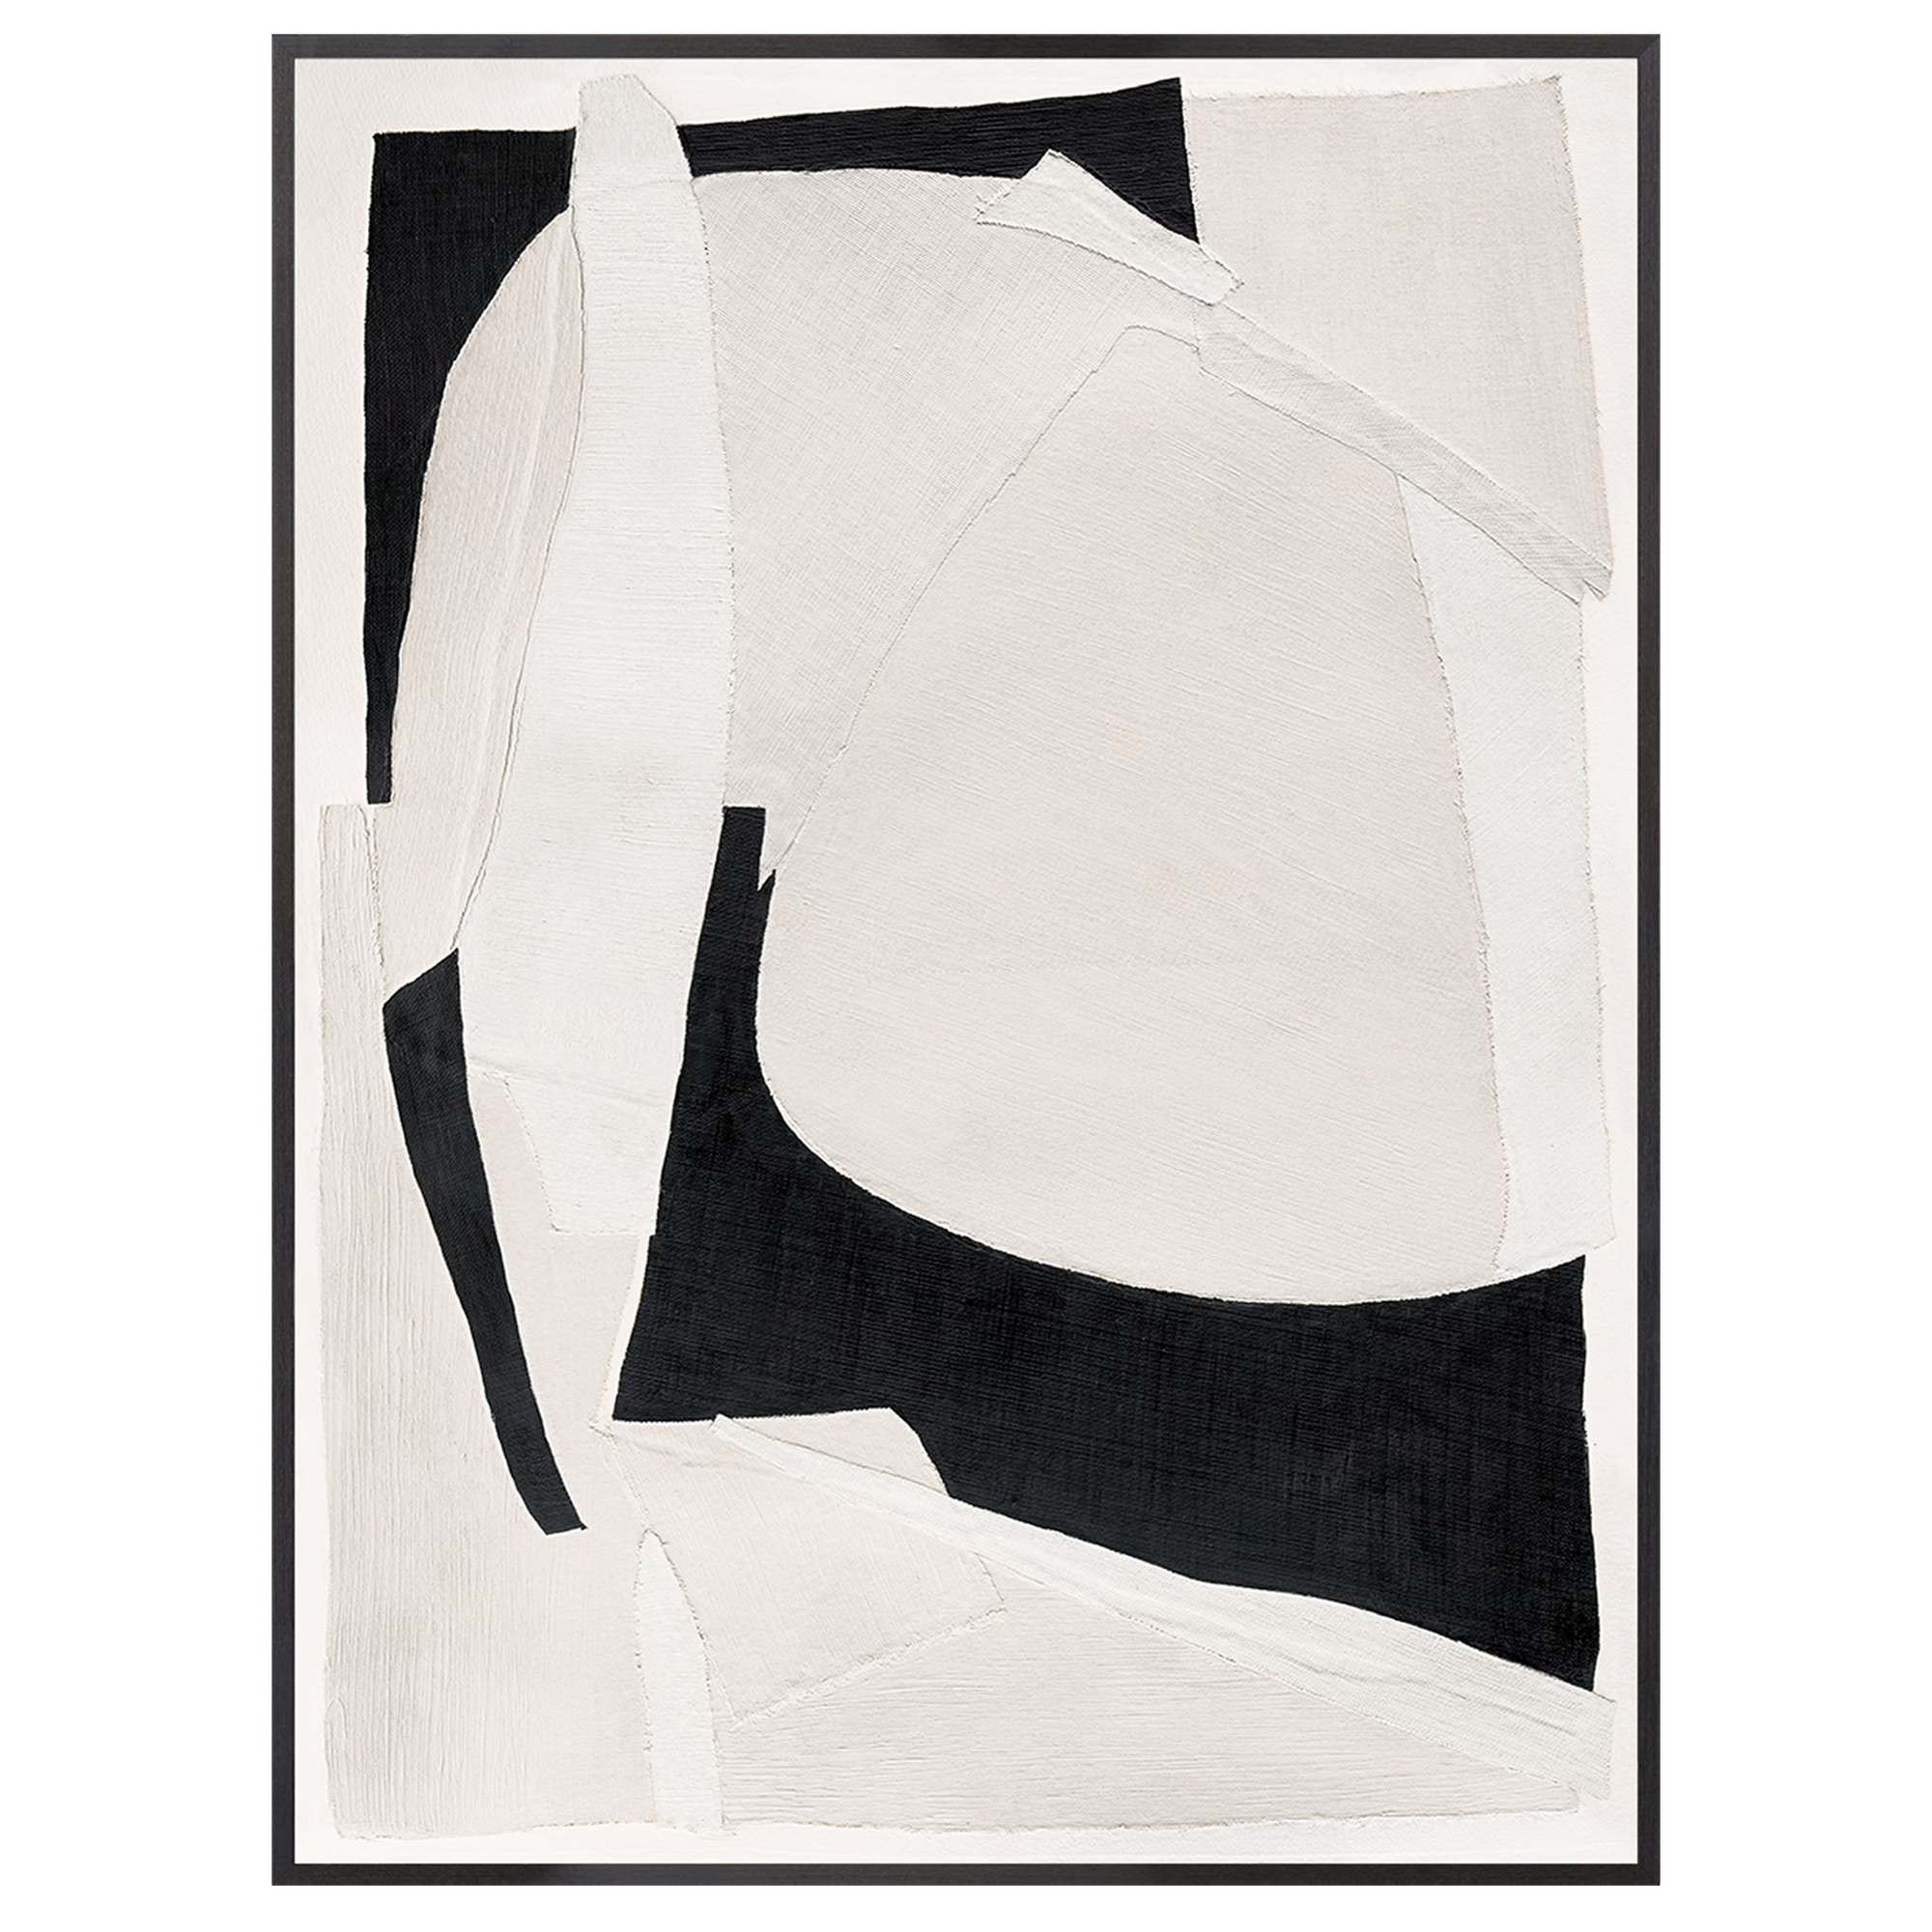 Textiles of black, cream, and ivory were layered carefully to create this impactful mid-century style image.